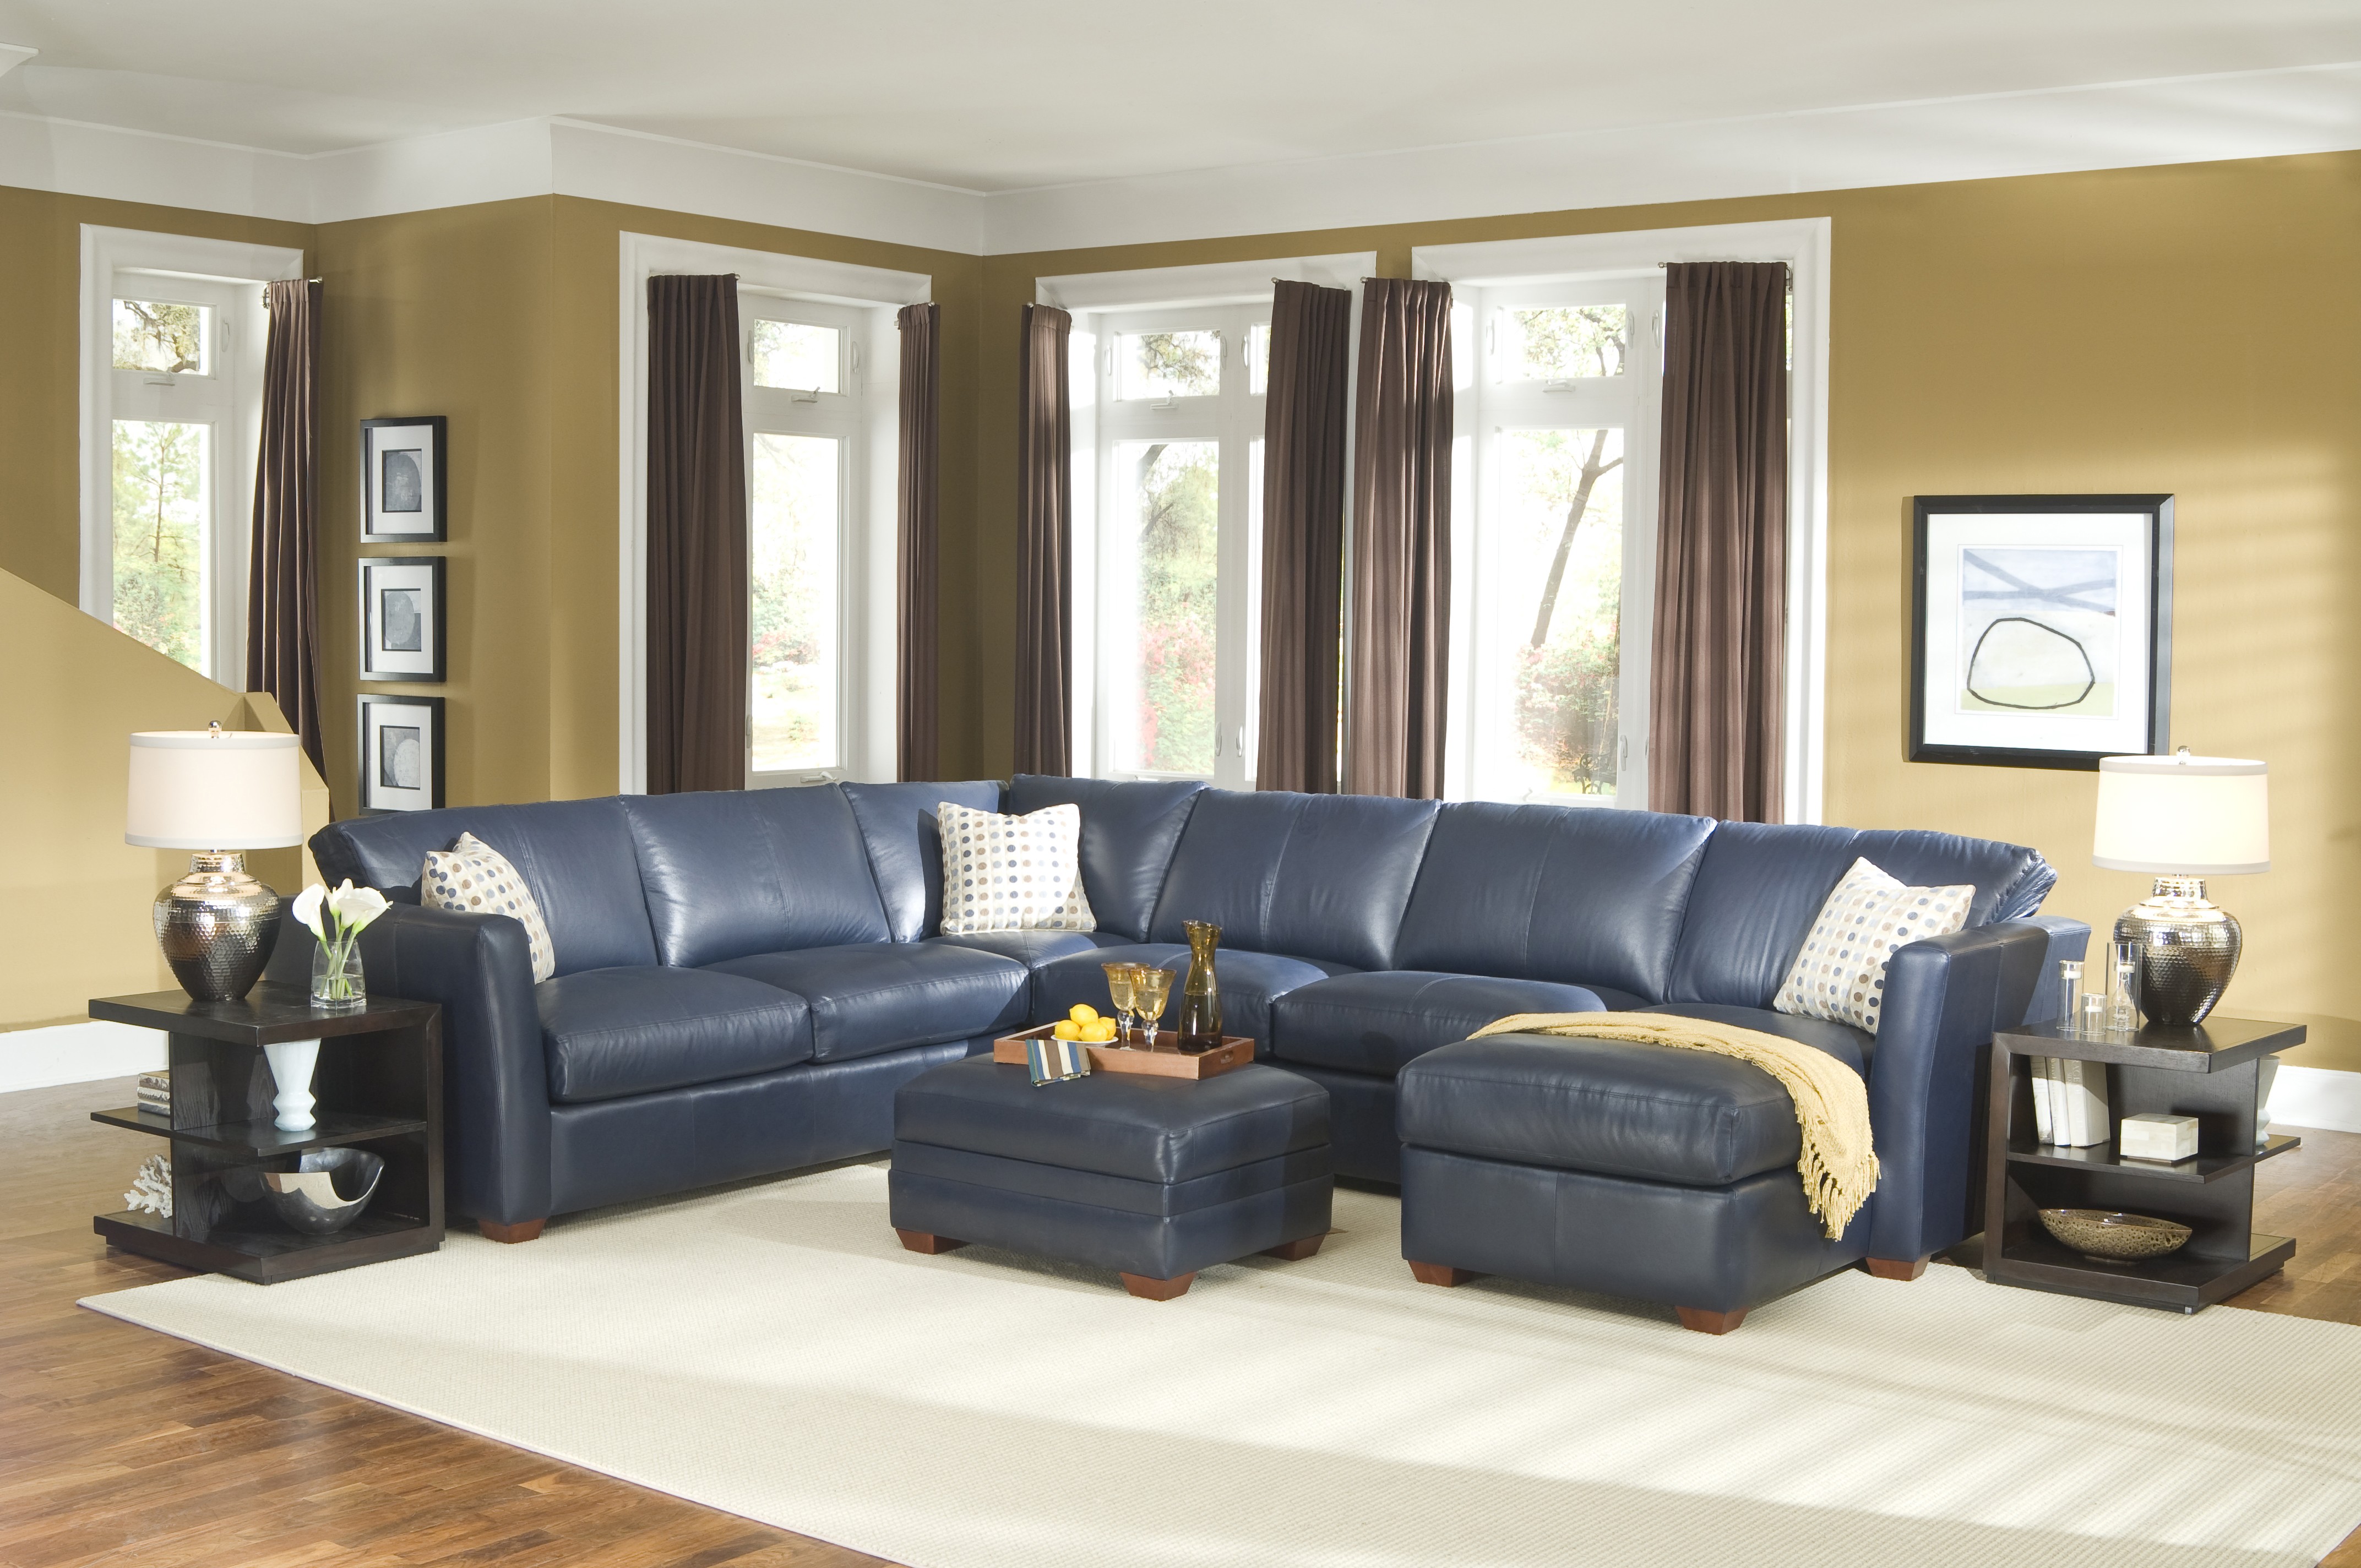 reclining light leather and furniture set covers black couches jcpenney corner lounge sectional recliner target lazy chaise boy loveseat sofa blue slipcovers slipcover navy accent